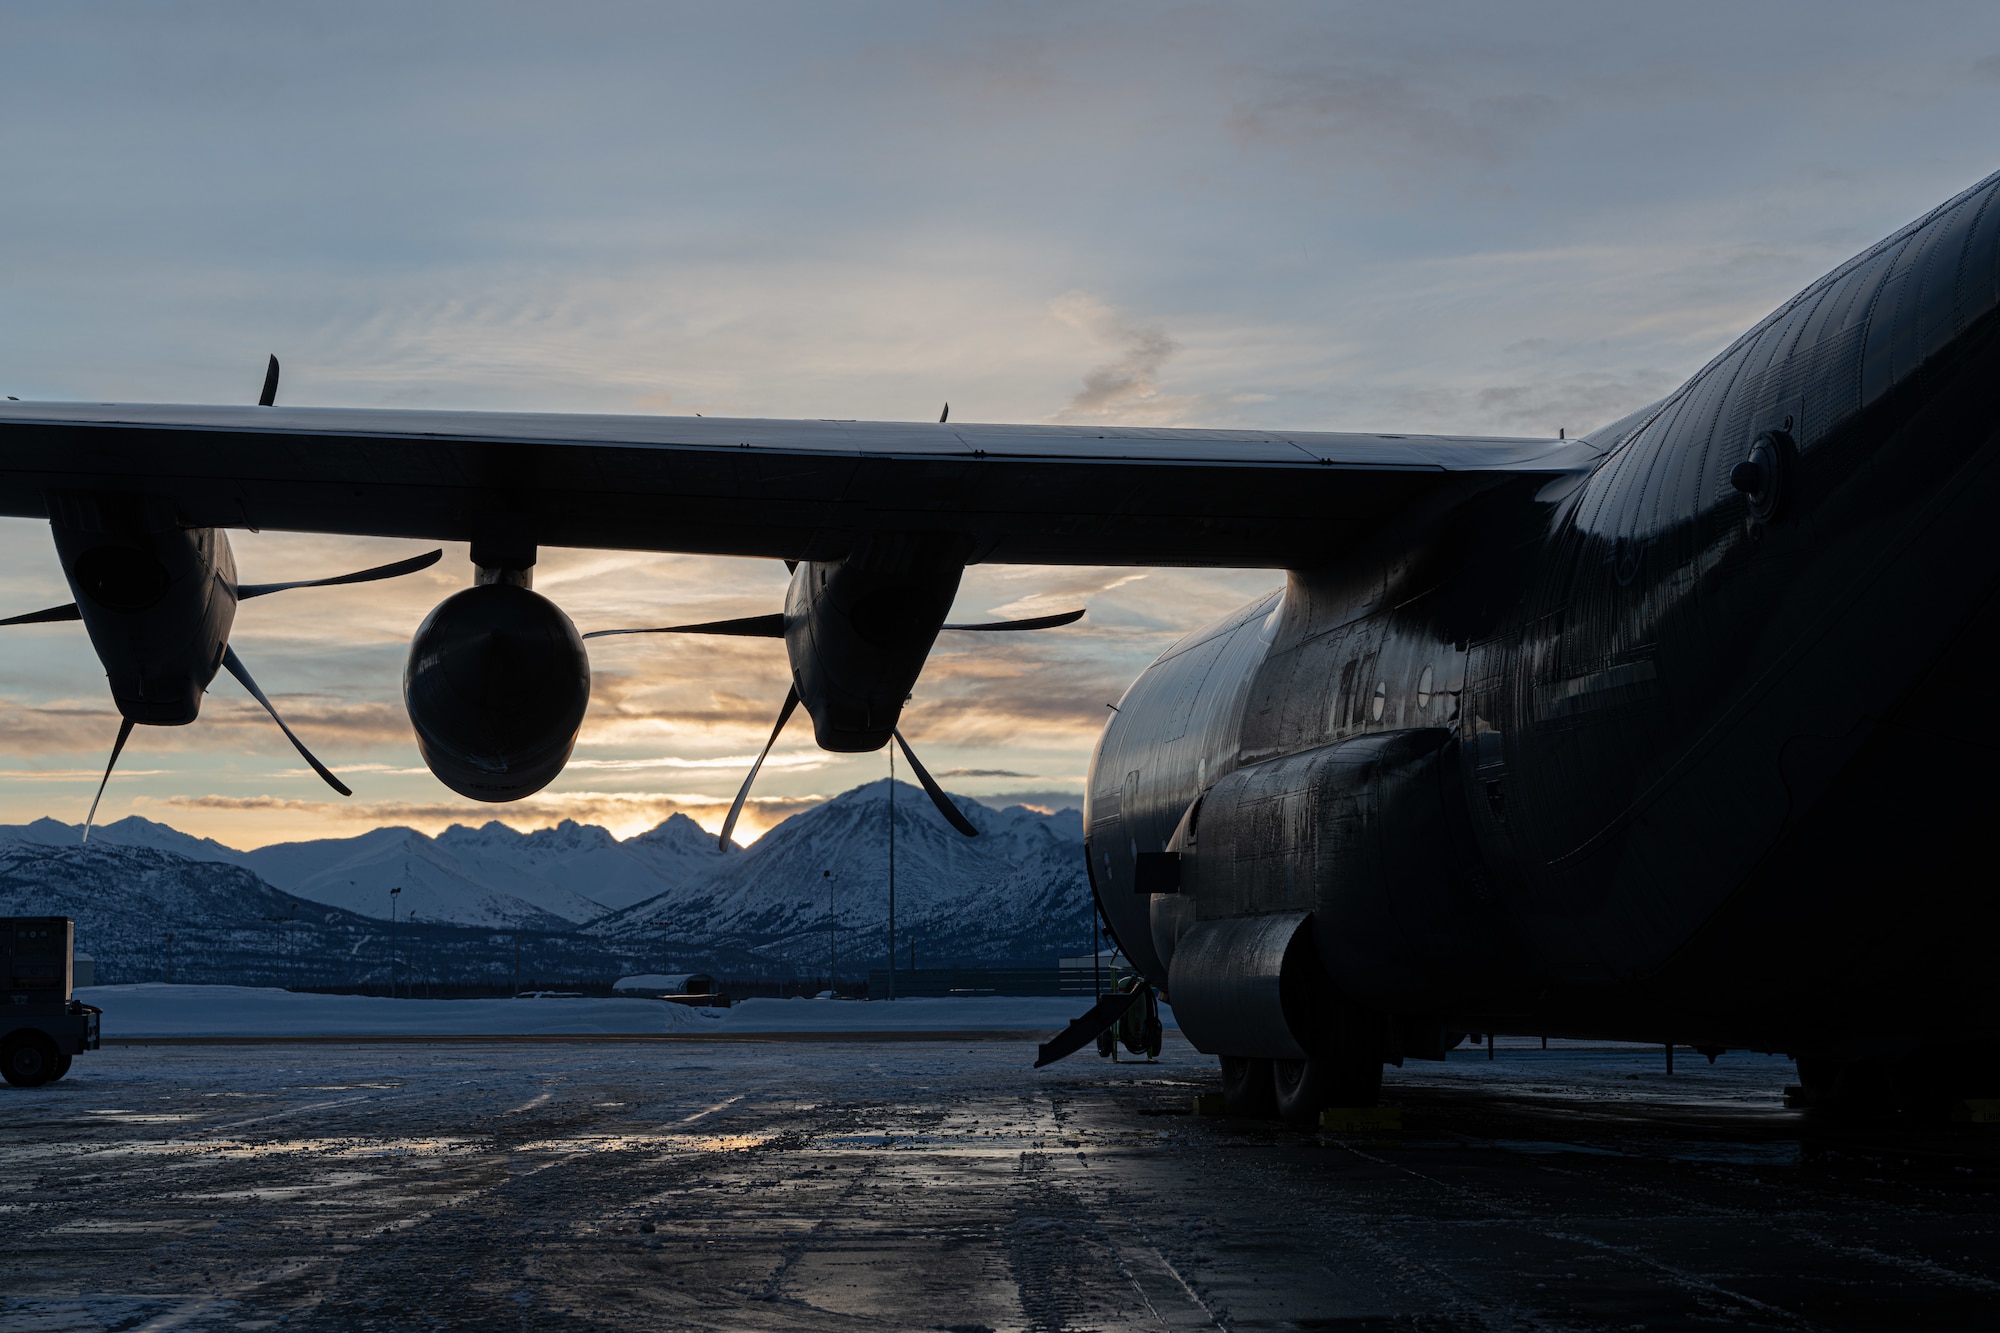 An MC-130J Commando II assigned to the 27th Special Operations Wing is parked on the flightline during Arctic Edge 24 in Anchorage, Alaska, Feb. 27, 2024. AE24 is an annual defense exercise for the U.S. Northern Command emphasizing Joint Force operations in an extreme cold weather and high latitude environment and is designed to demonstrate Globally Integrated Layered Defense in the Arctic. (U.S. Air Force photo by Senior Airman Drew Cyburt)